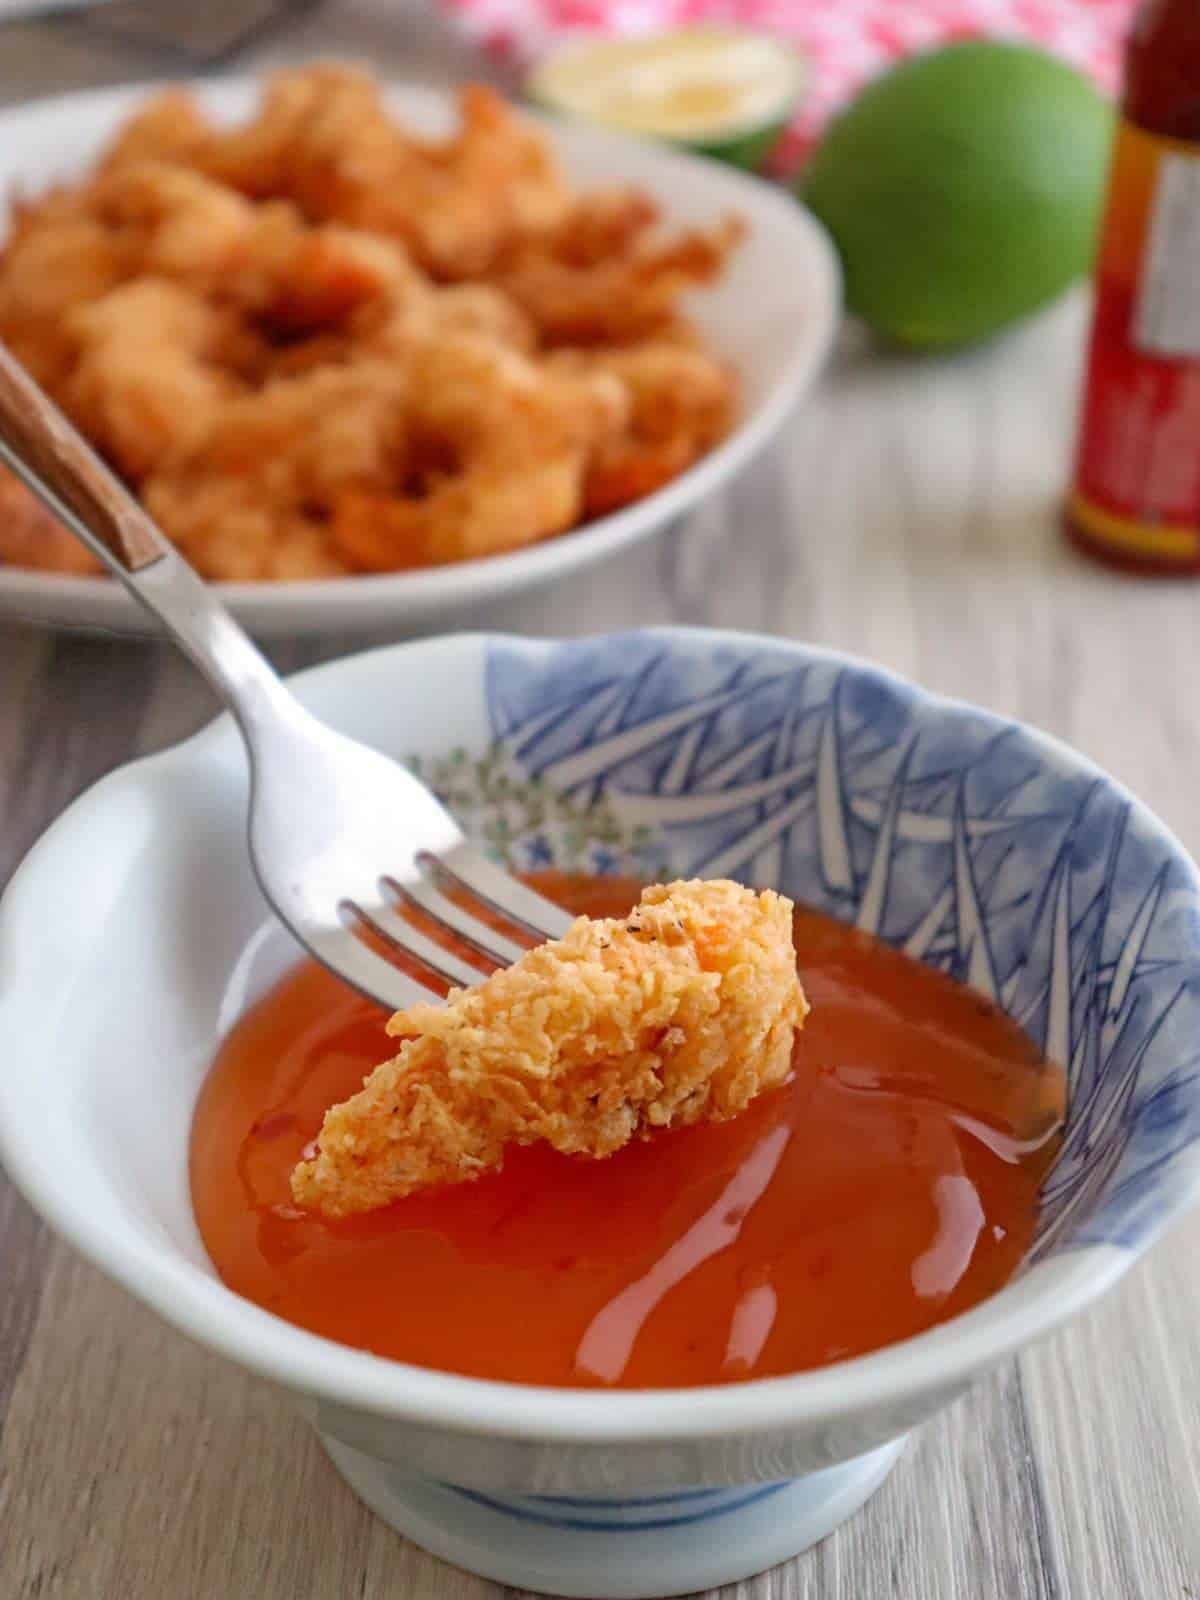 dipping fried shrimp in sweet and sour sauce